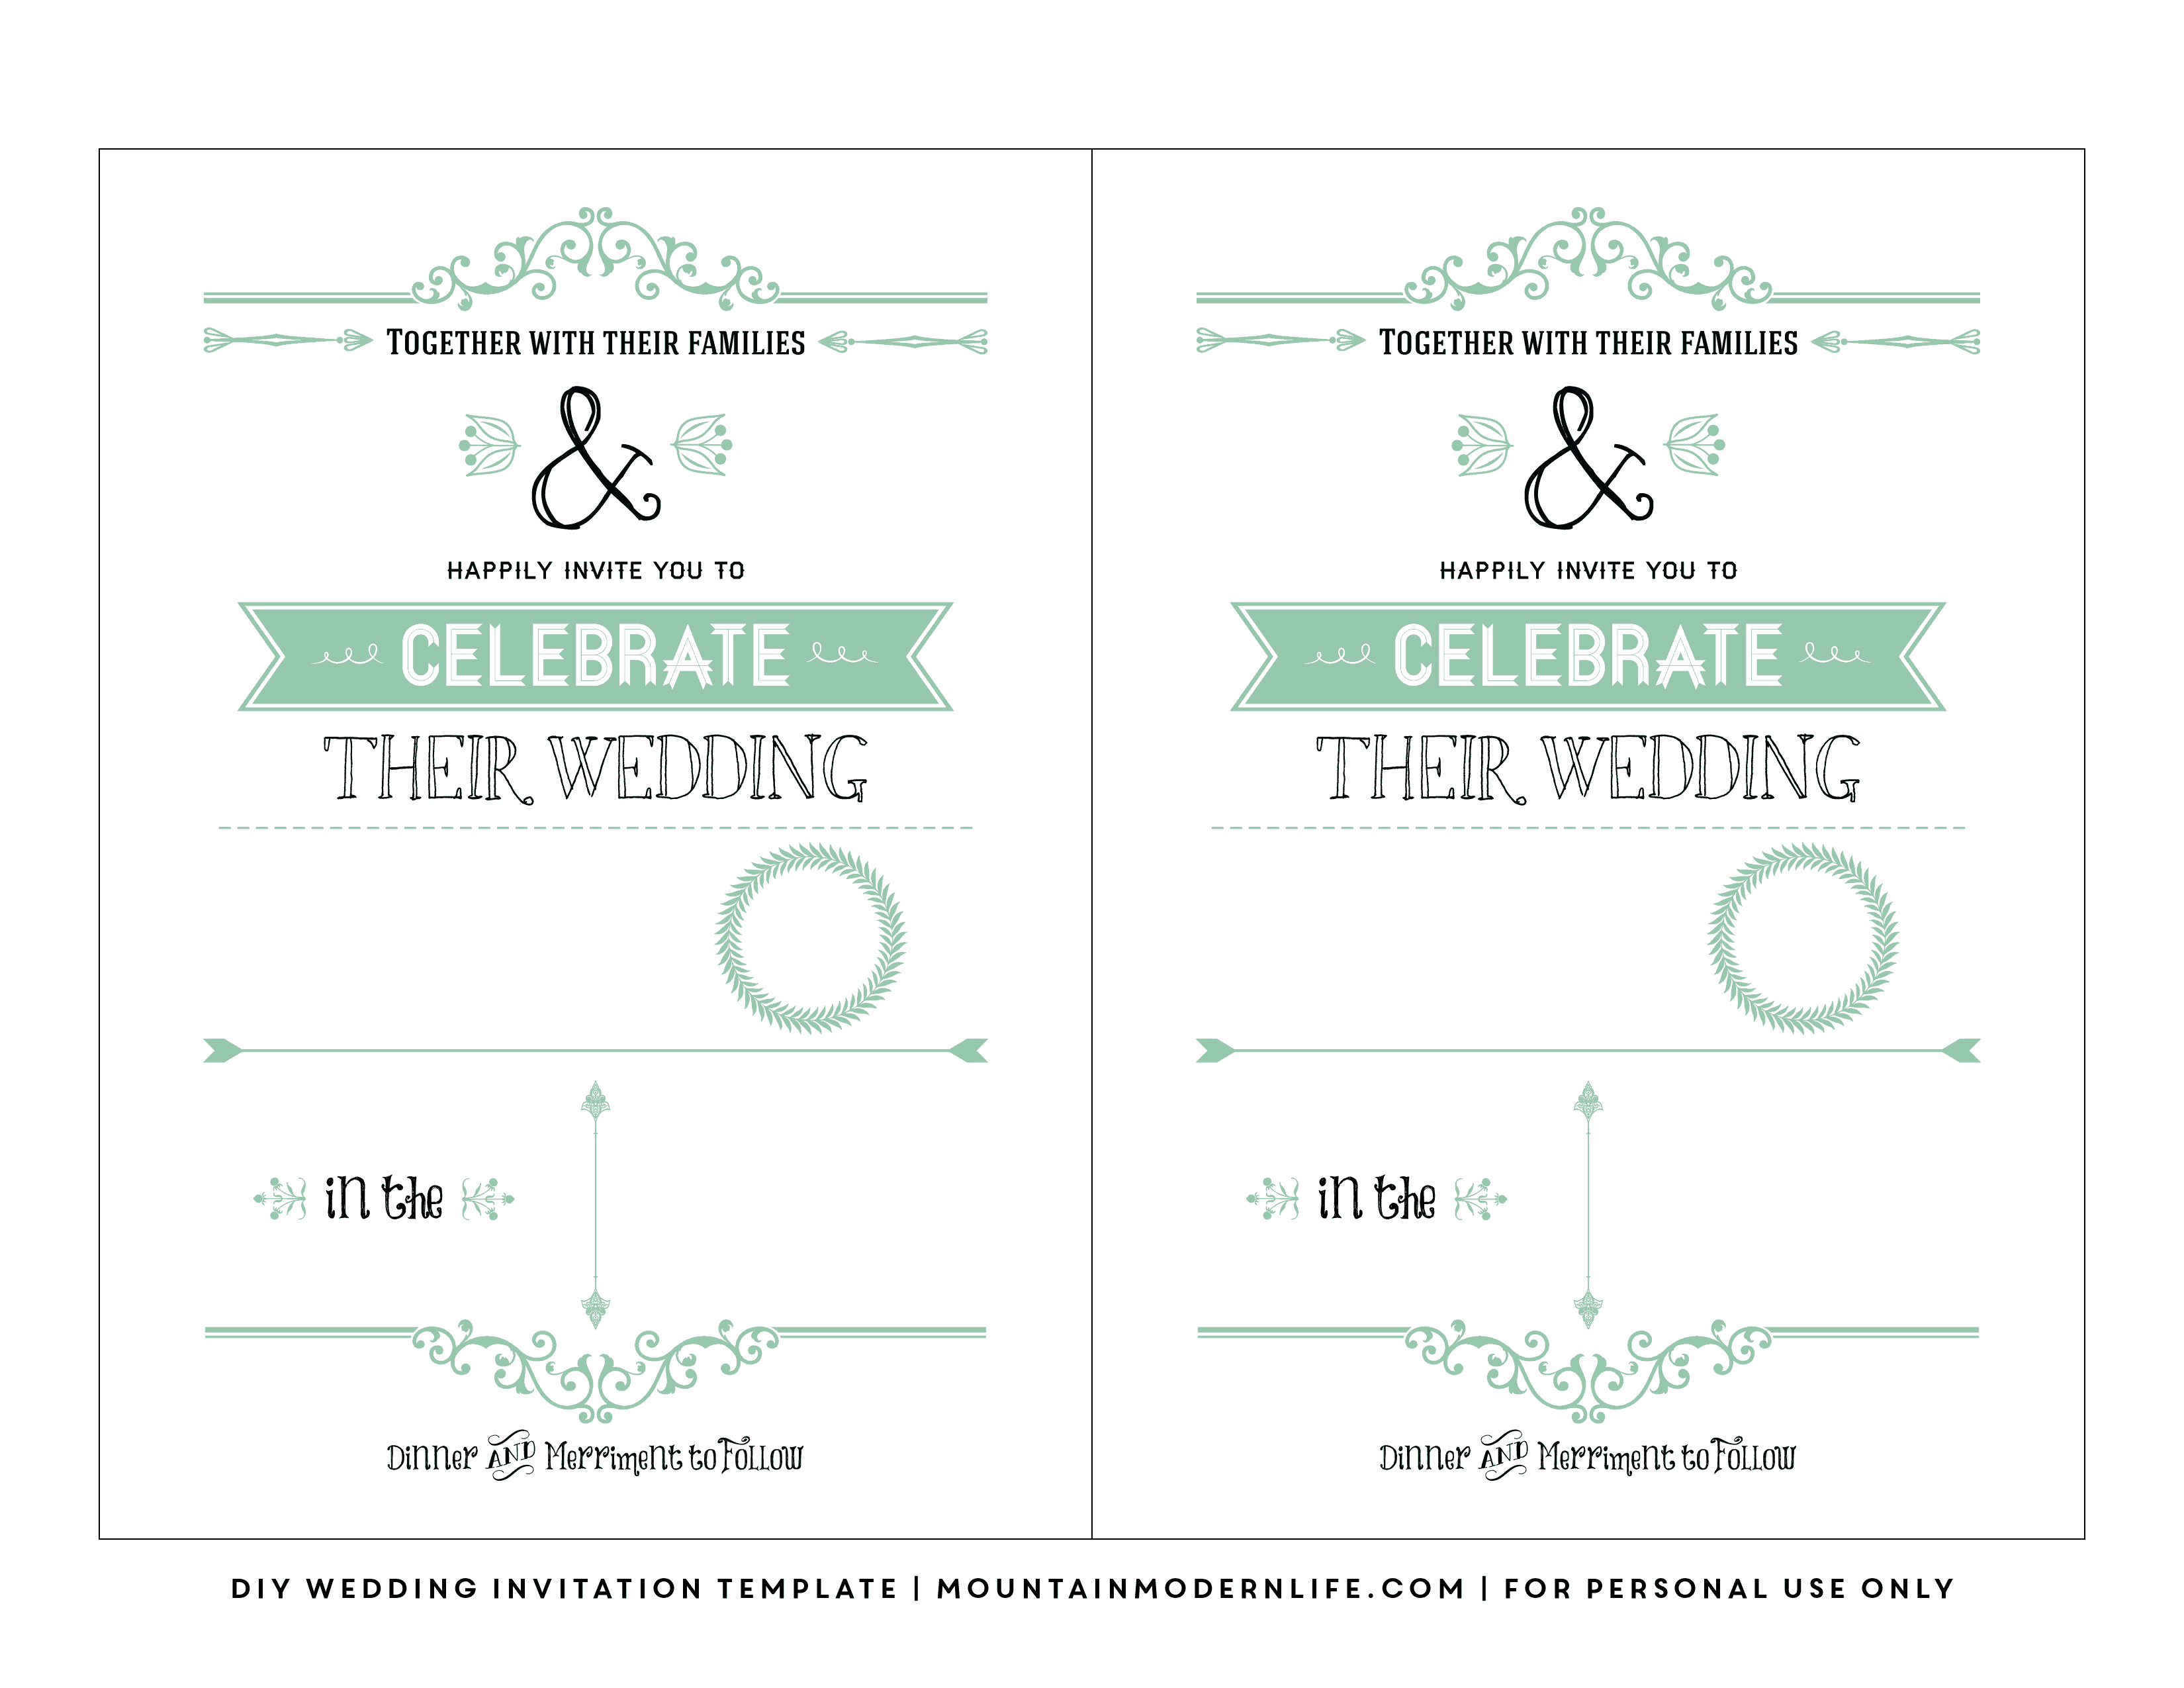 99 Customize Our Free Mint Green Wedding Invitation Template Photo by Mint Green Wedding Invitation Template